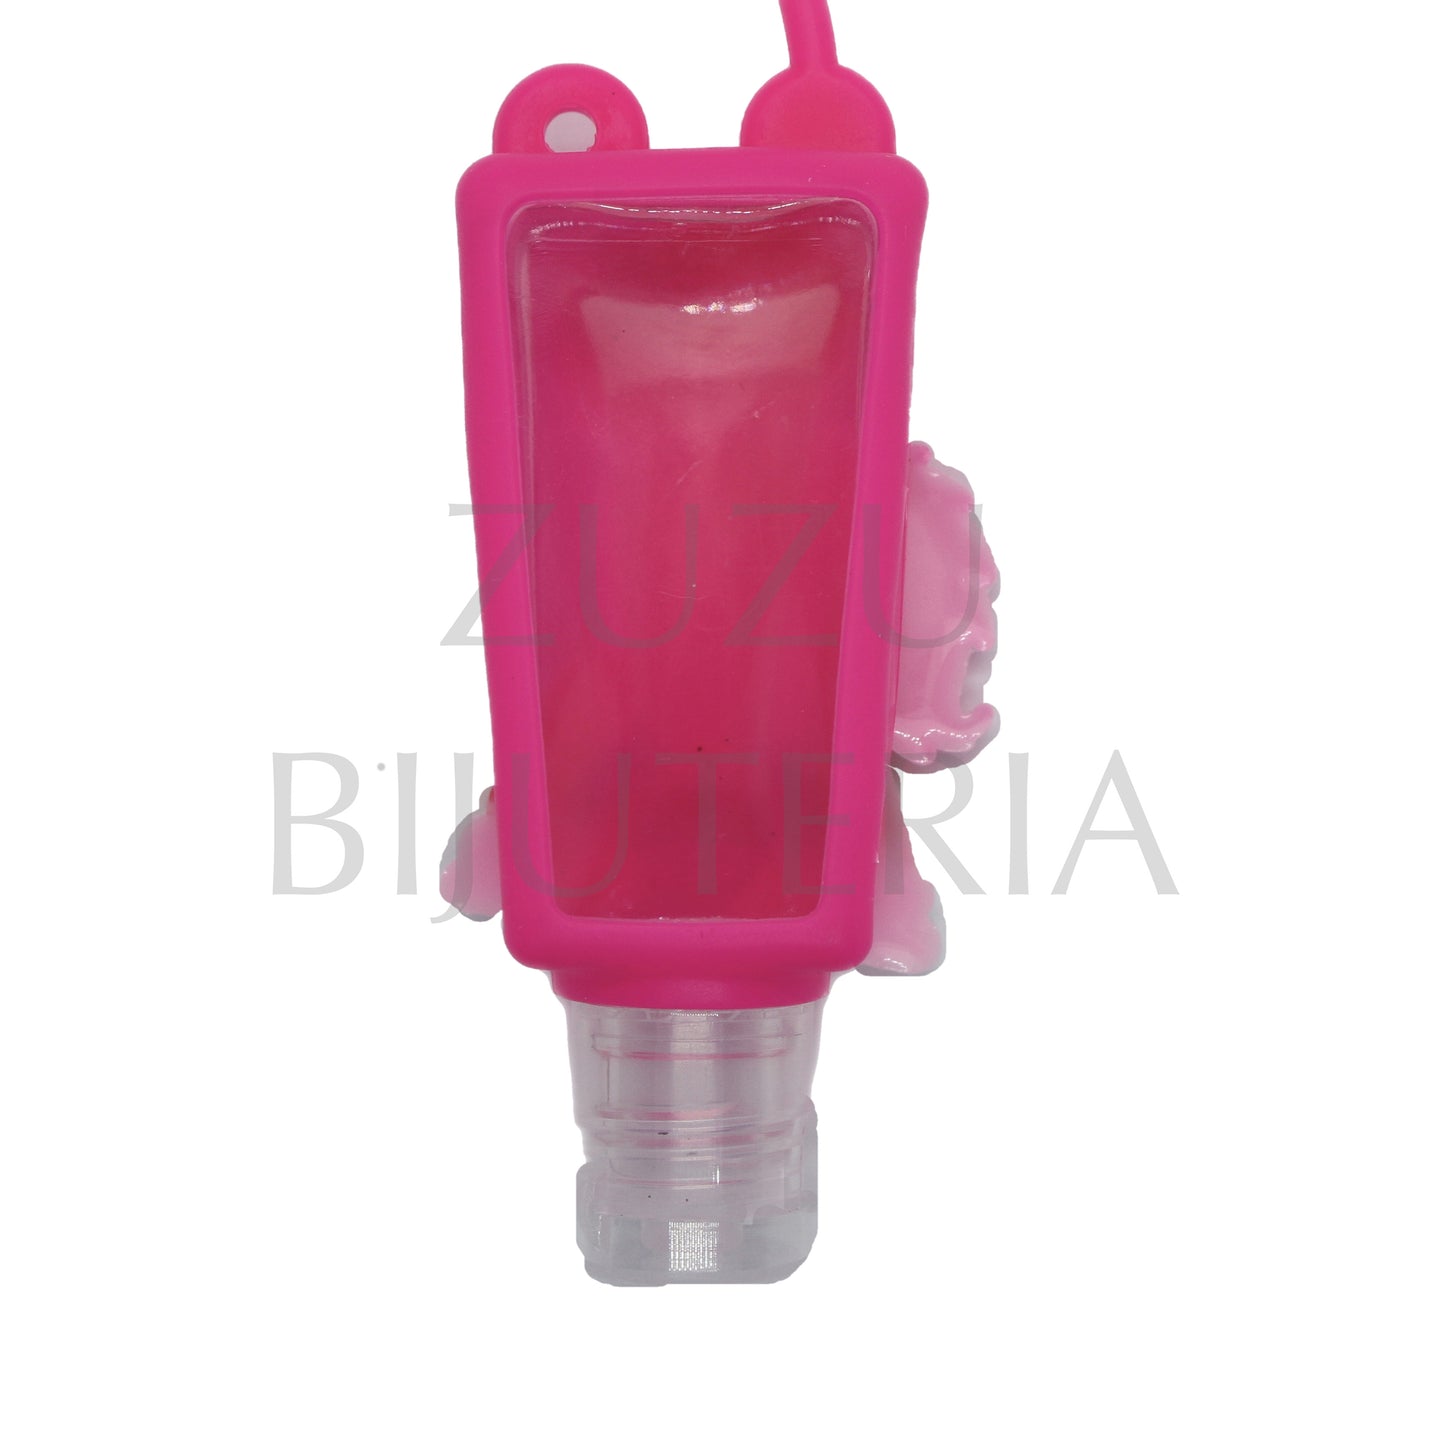 35ml Bottle for Disinfectant Gel 78mm x 30mm - Neon Pink